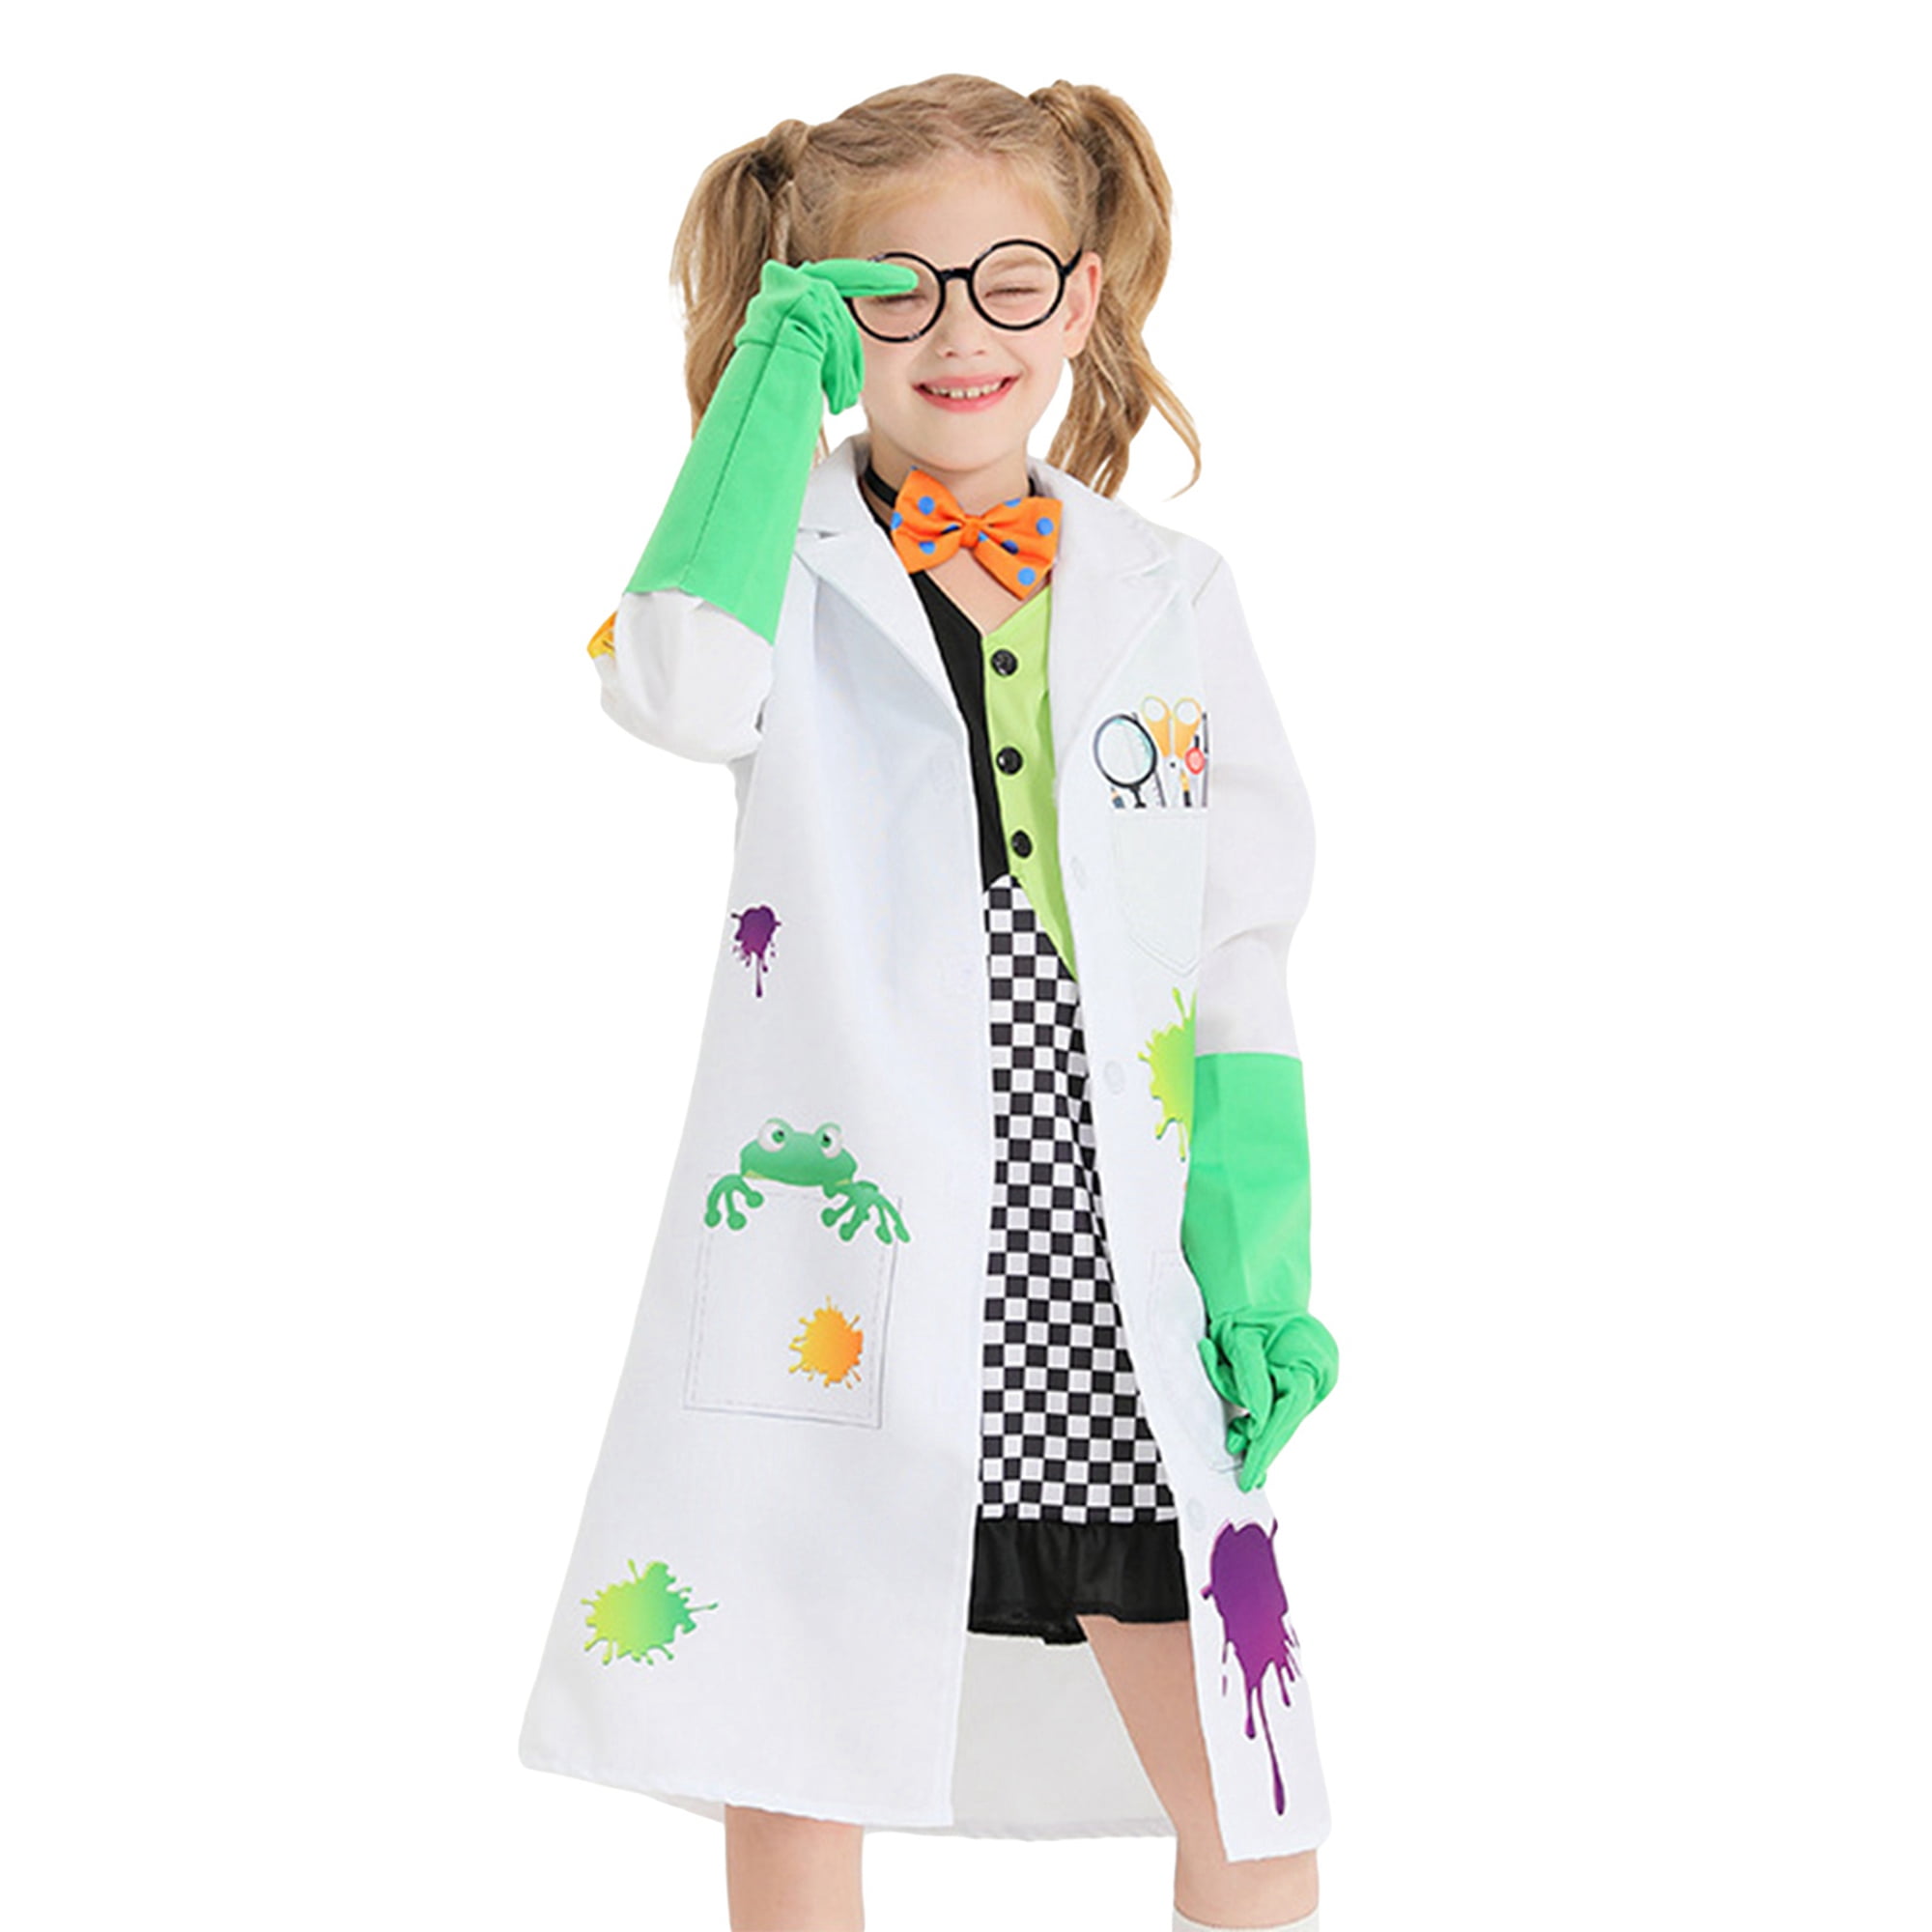 Lewtemi Set of 6 Halloween Doctor Scientist Lab Costume Kit for Kids Role Play Set for Toddler Boys Girls Gifts (8-10 Years)